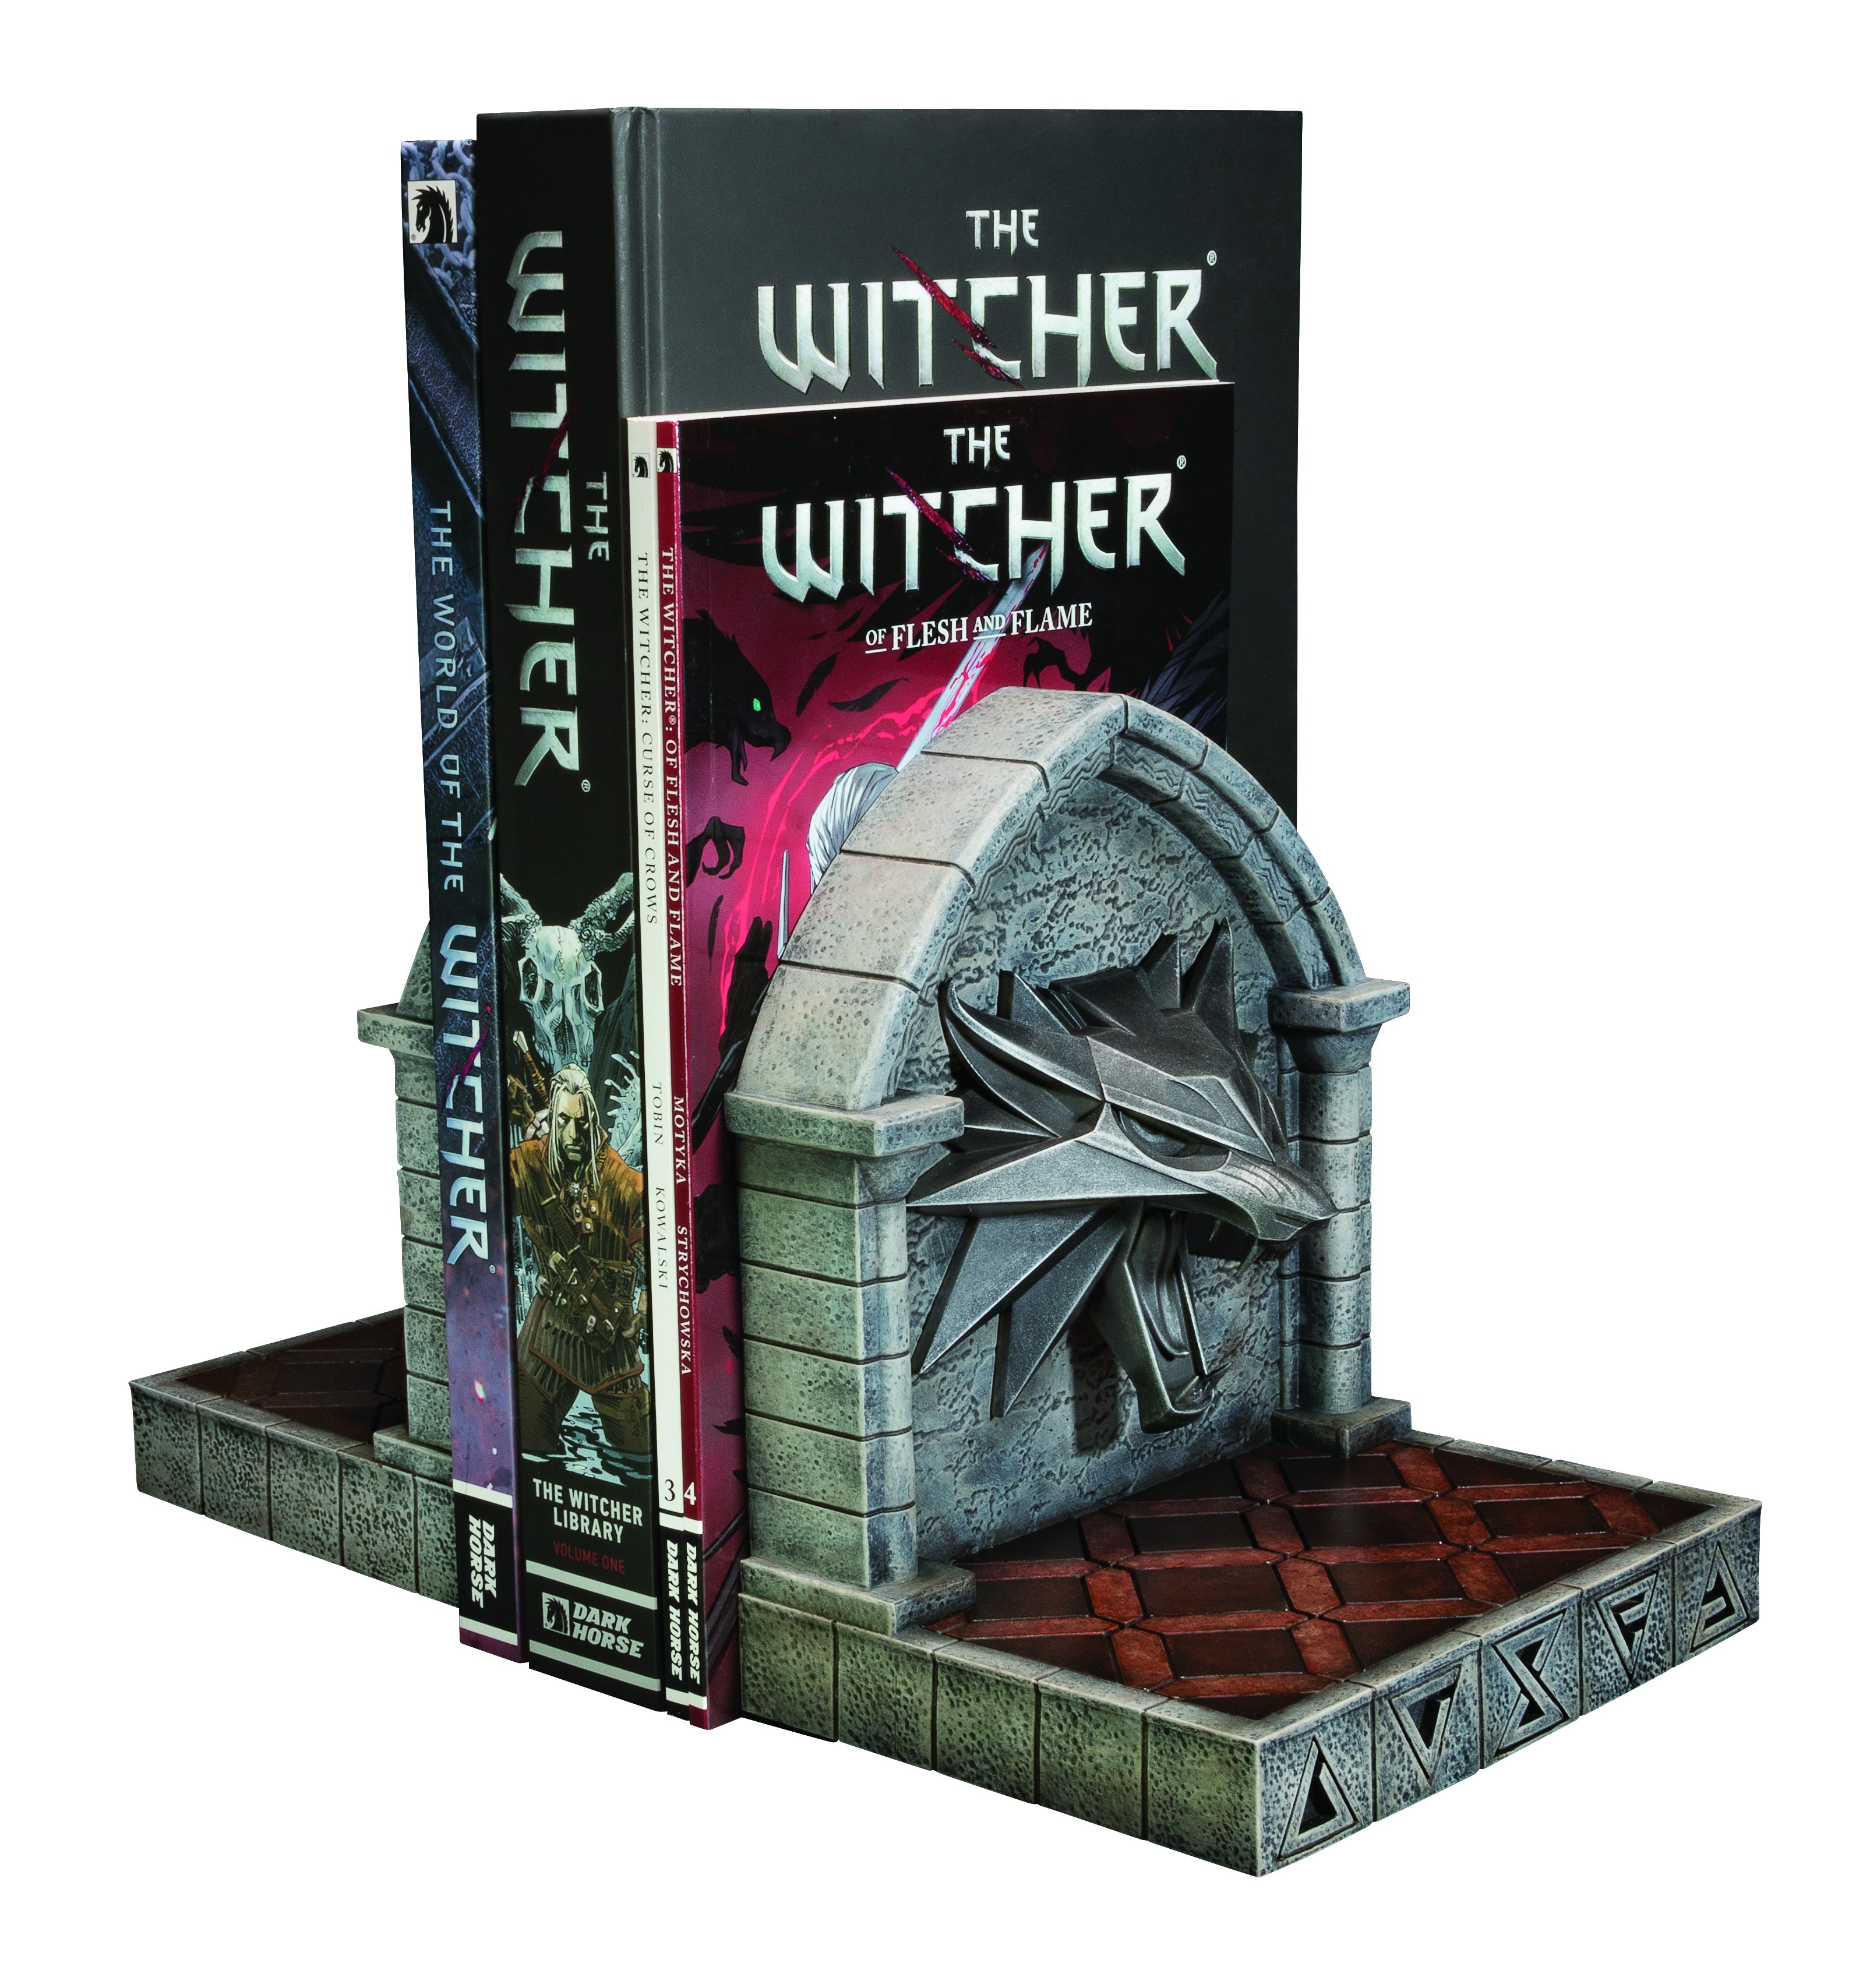 PRE-ORDER The Witcher 3 - Wild Hunt: Bookends